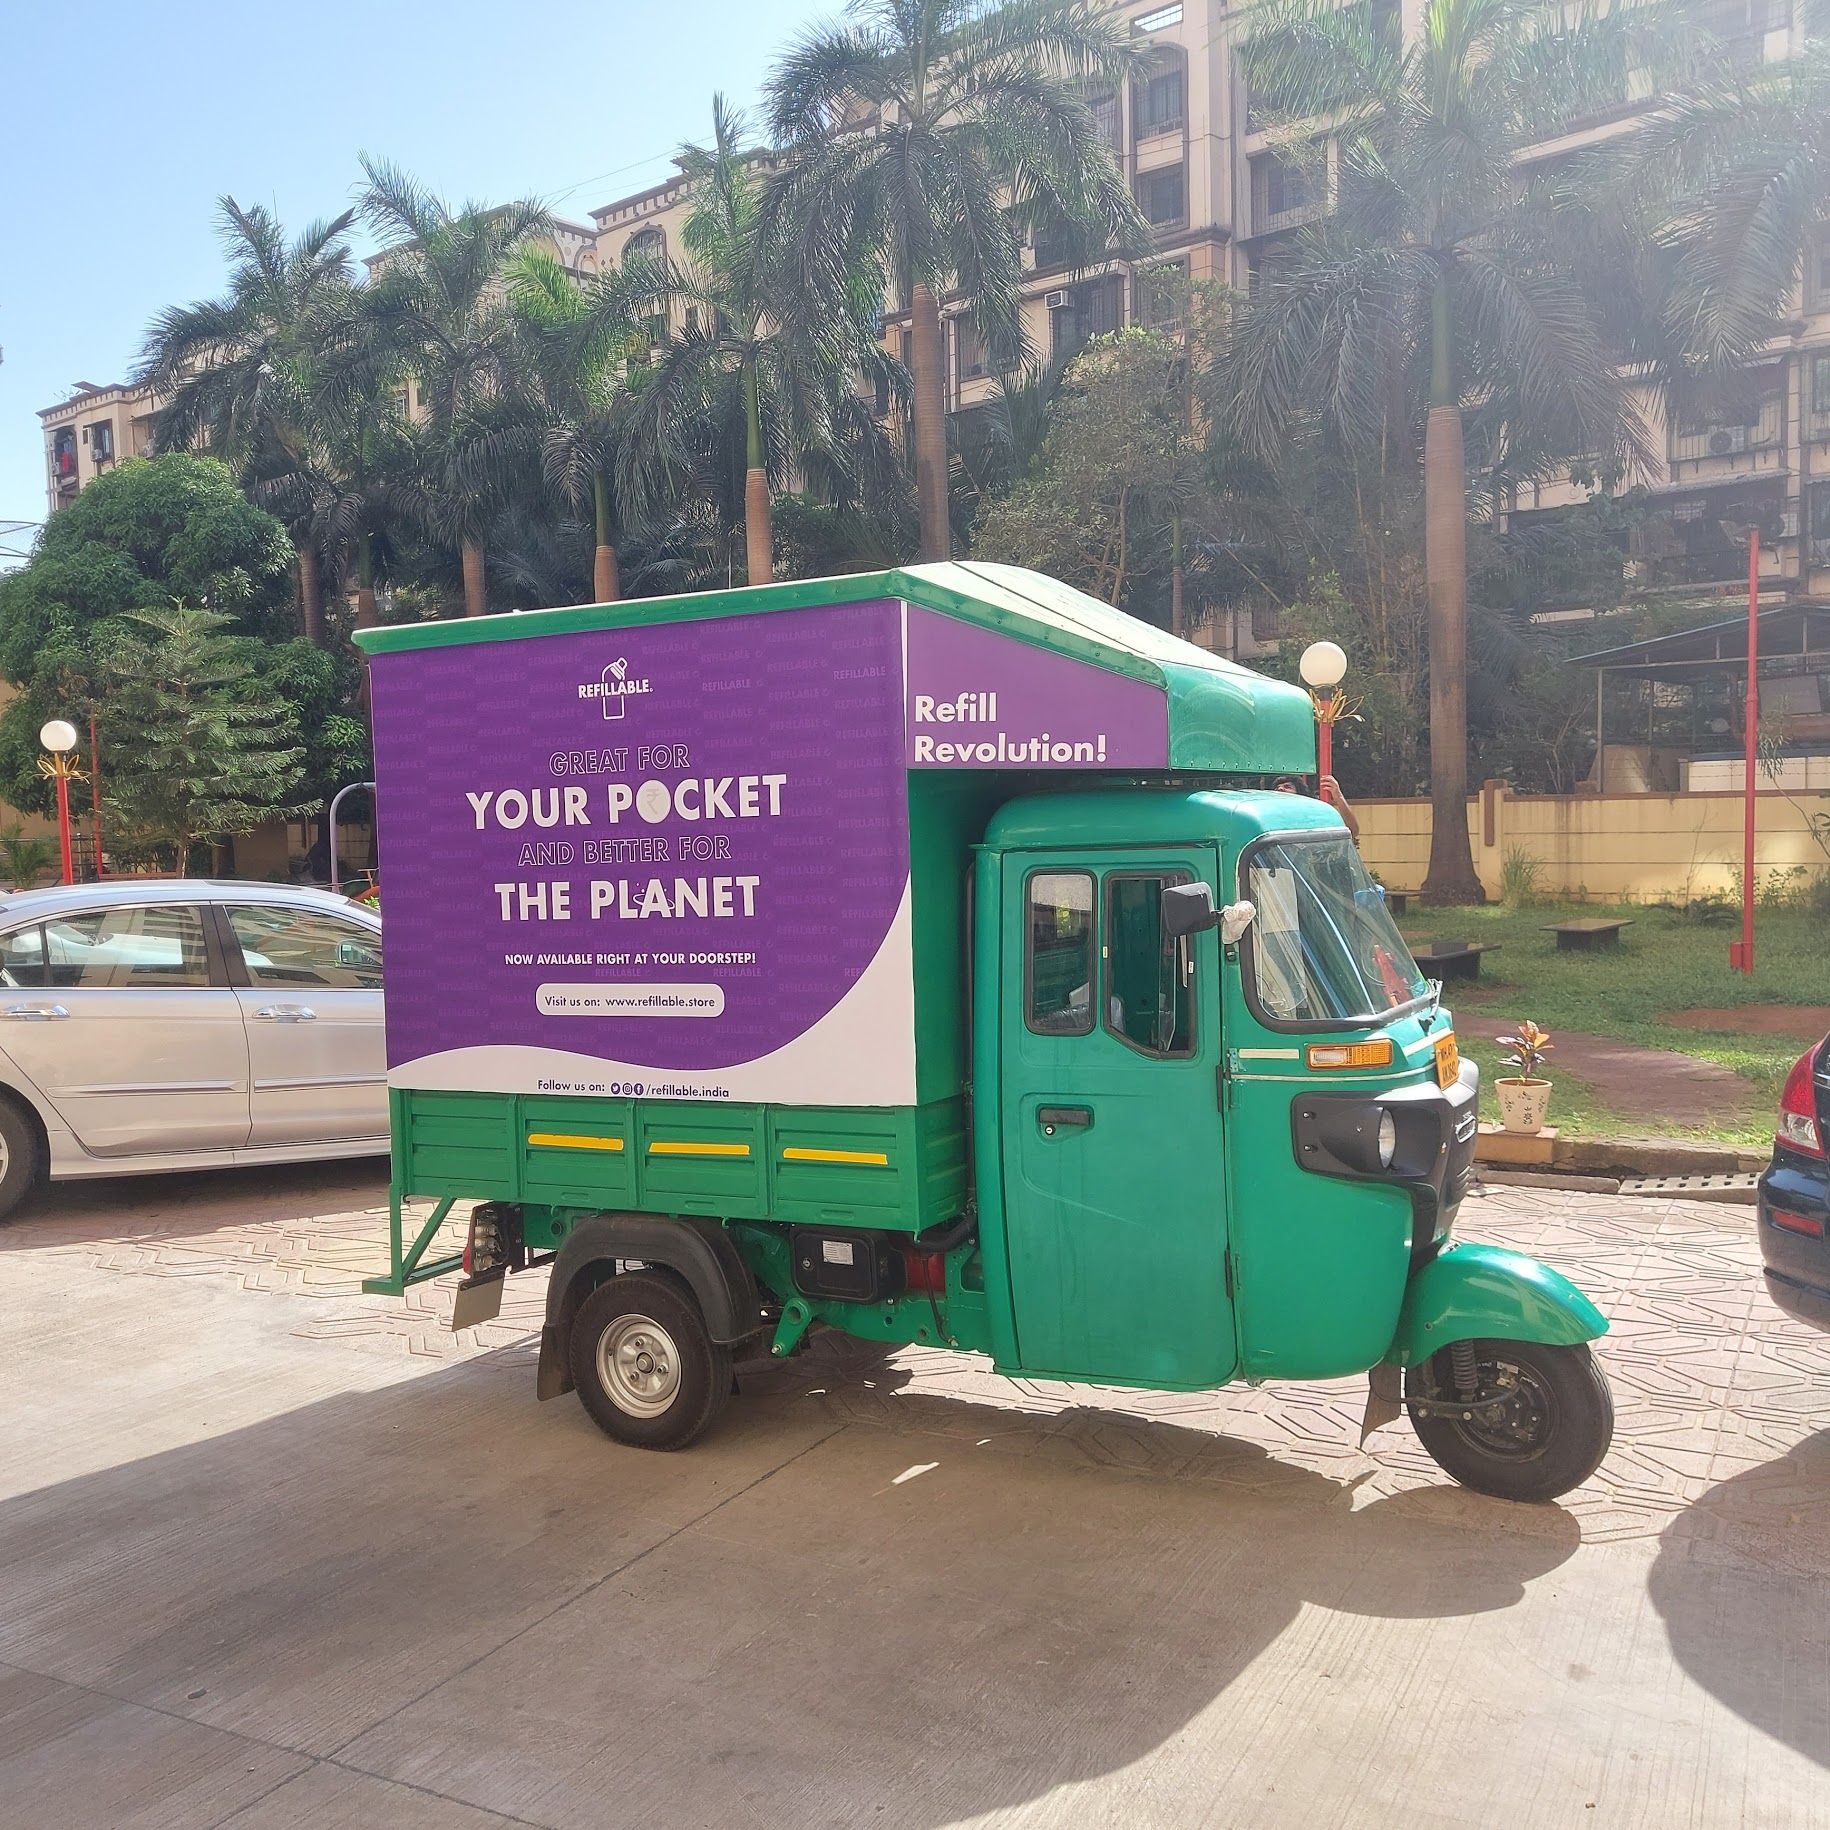 A tuk-tuk retrofitted with a refill machine dispenses various types of floor cleaners, sanitisers, handwashes, and laundry detergents.